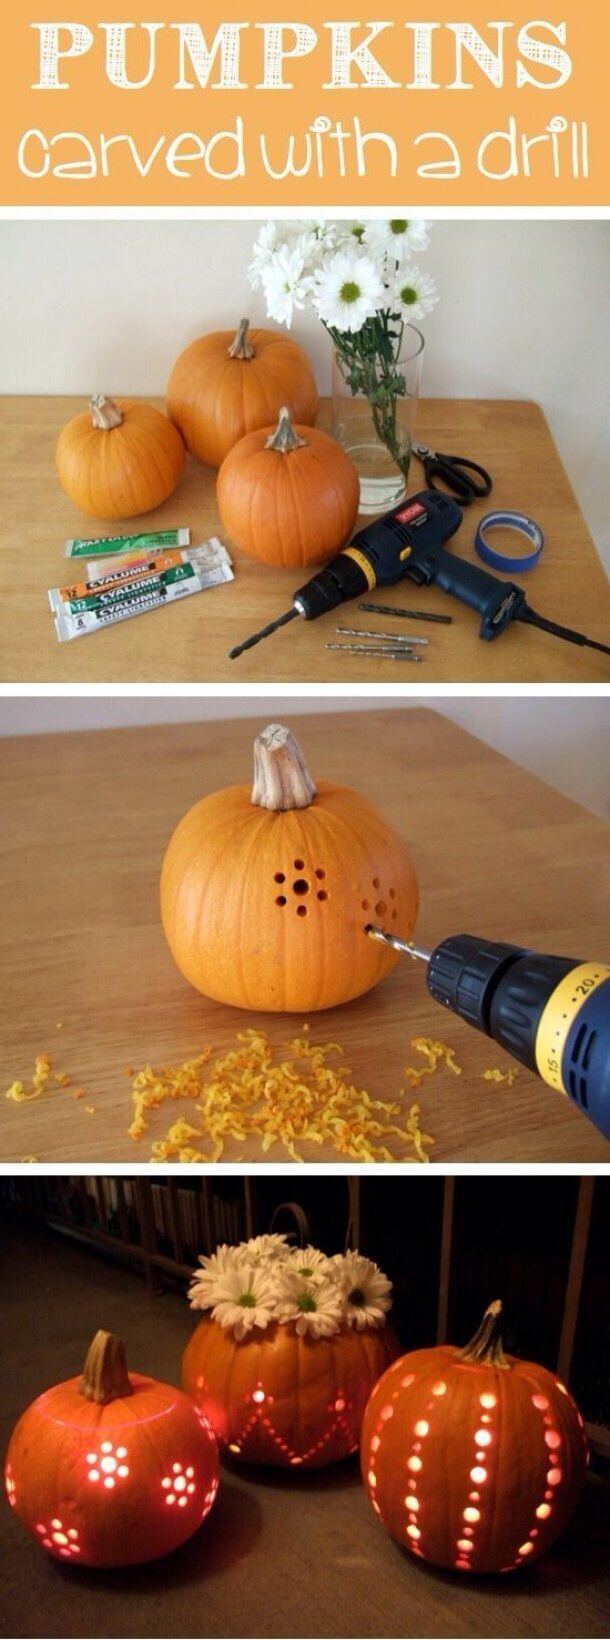 Pumpkins carved with a drill.